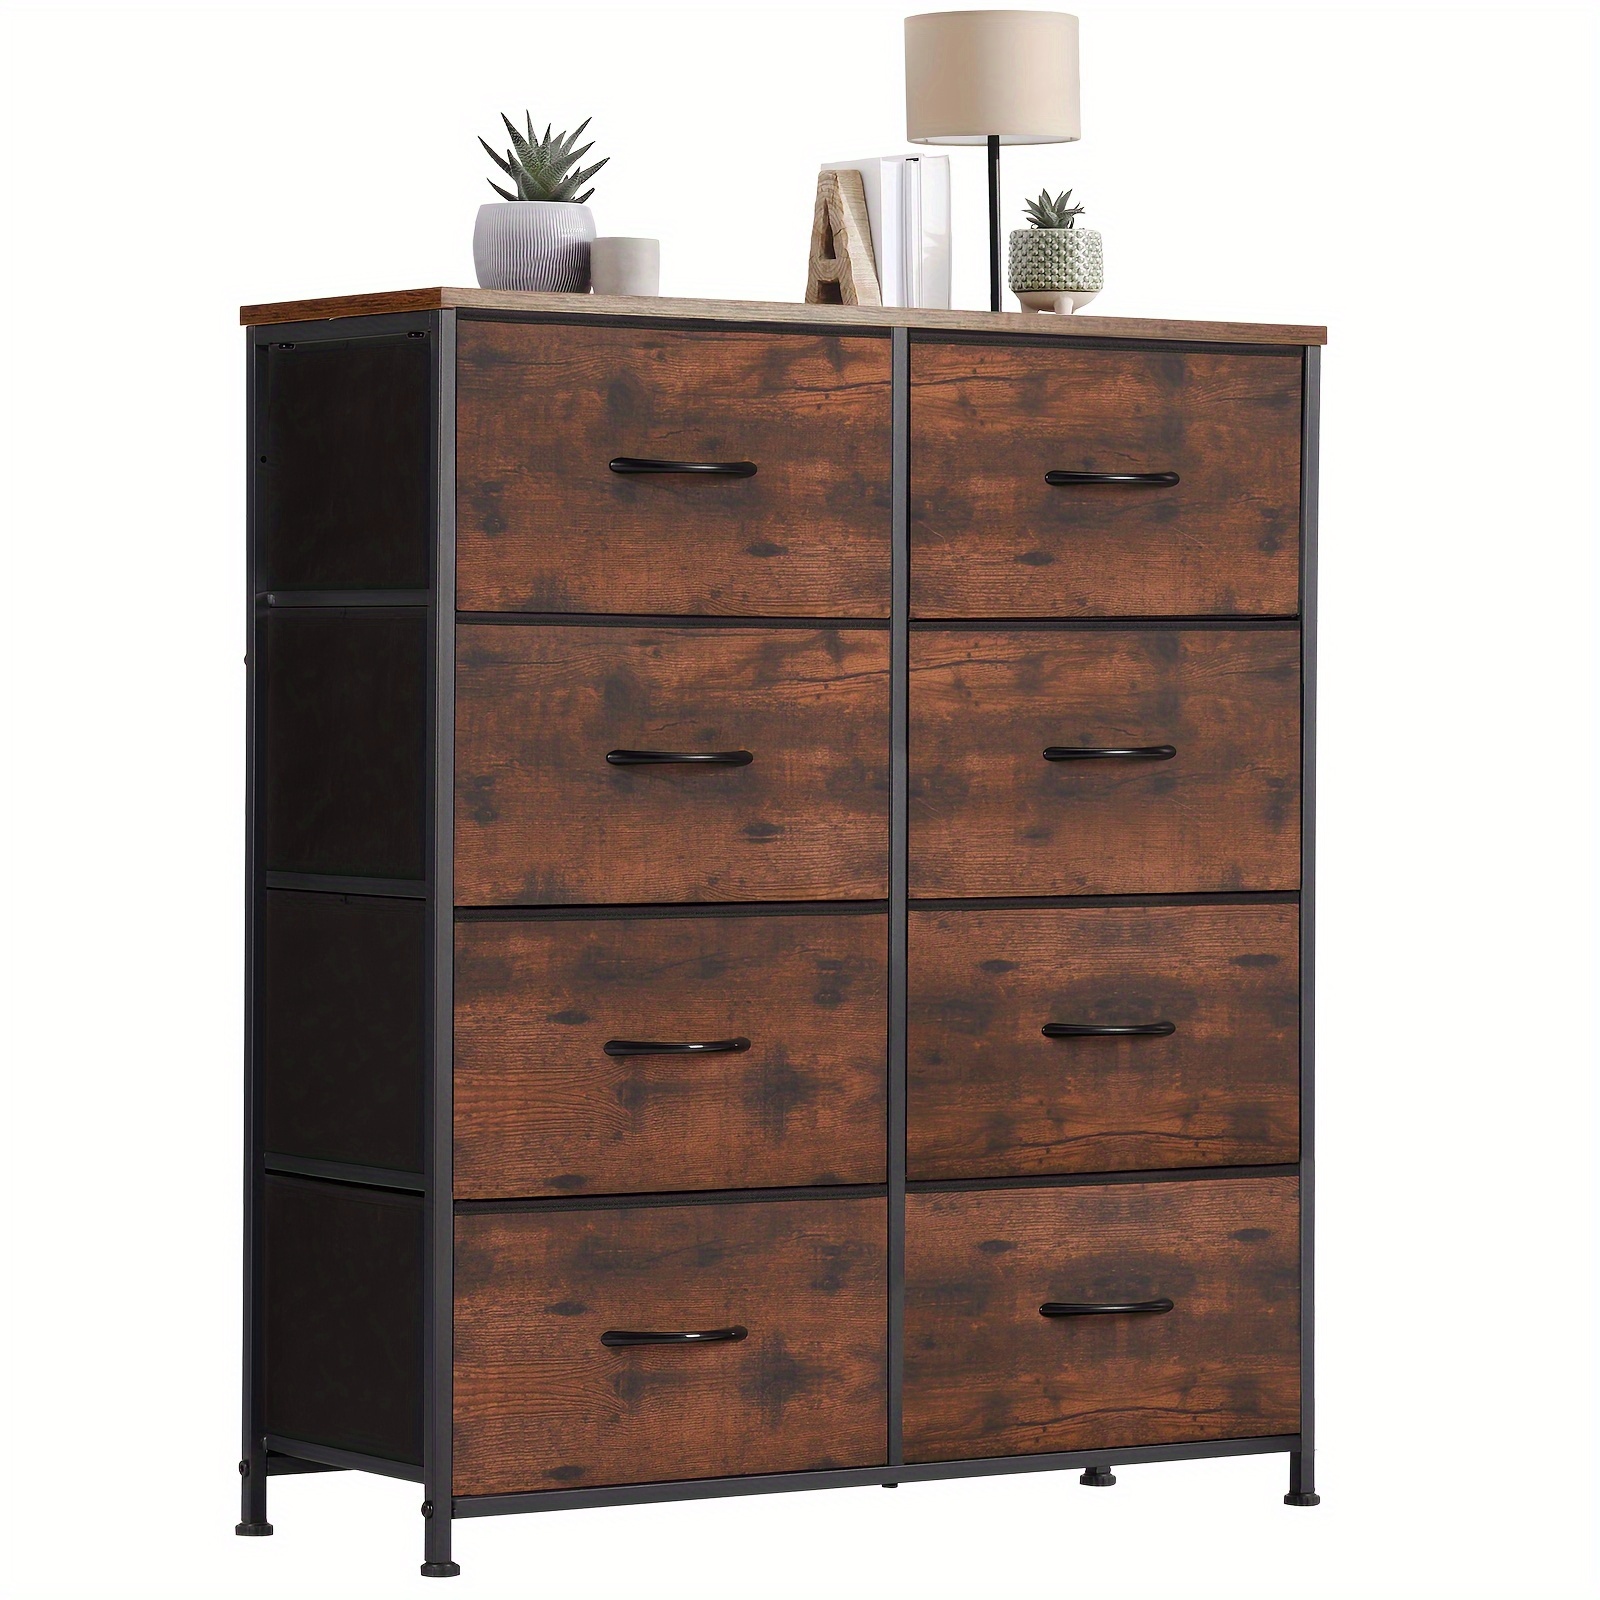 

Dresser For Bedroom With 8 Drawers, Clothes Drawer Fabric Closet Organizer, Dresser With Metal Frame And Wood Tabletop, Chest Storage Tower For Kids Room, Nursery, Living Room, Entryway